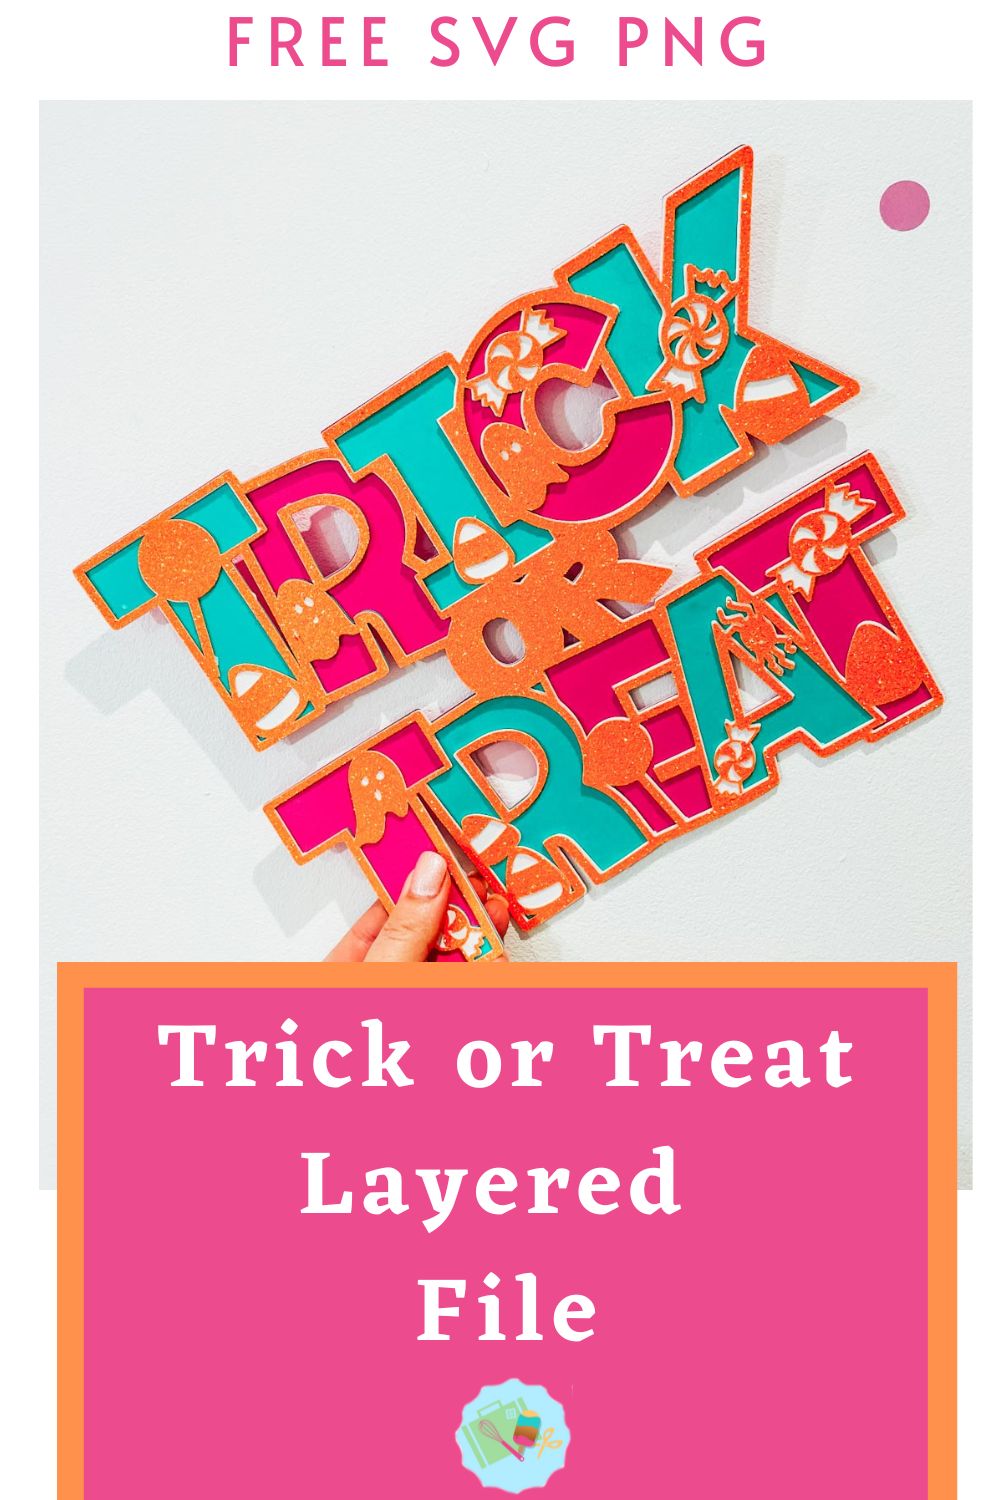 Free trick or treat SVG, PNG for Cricut, Glowforge and Silhouette